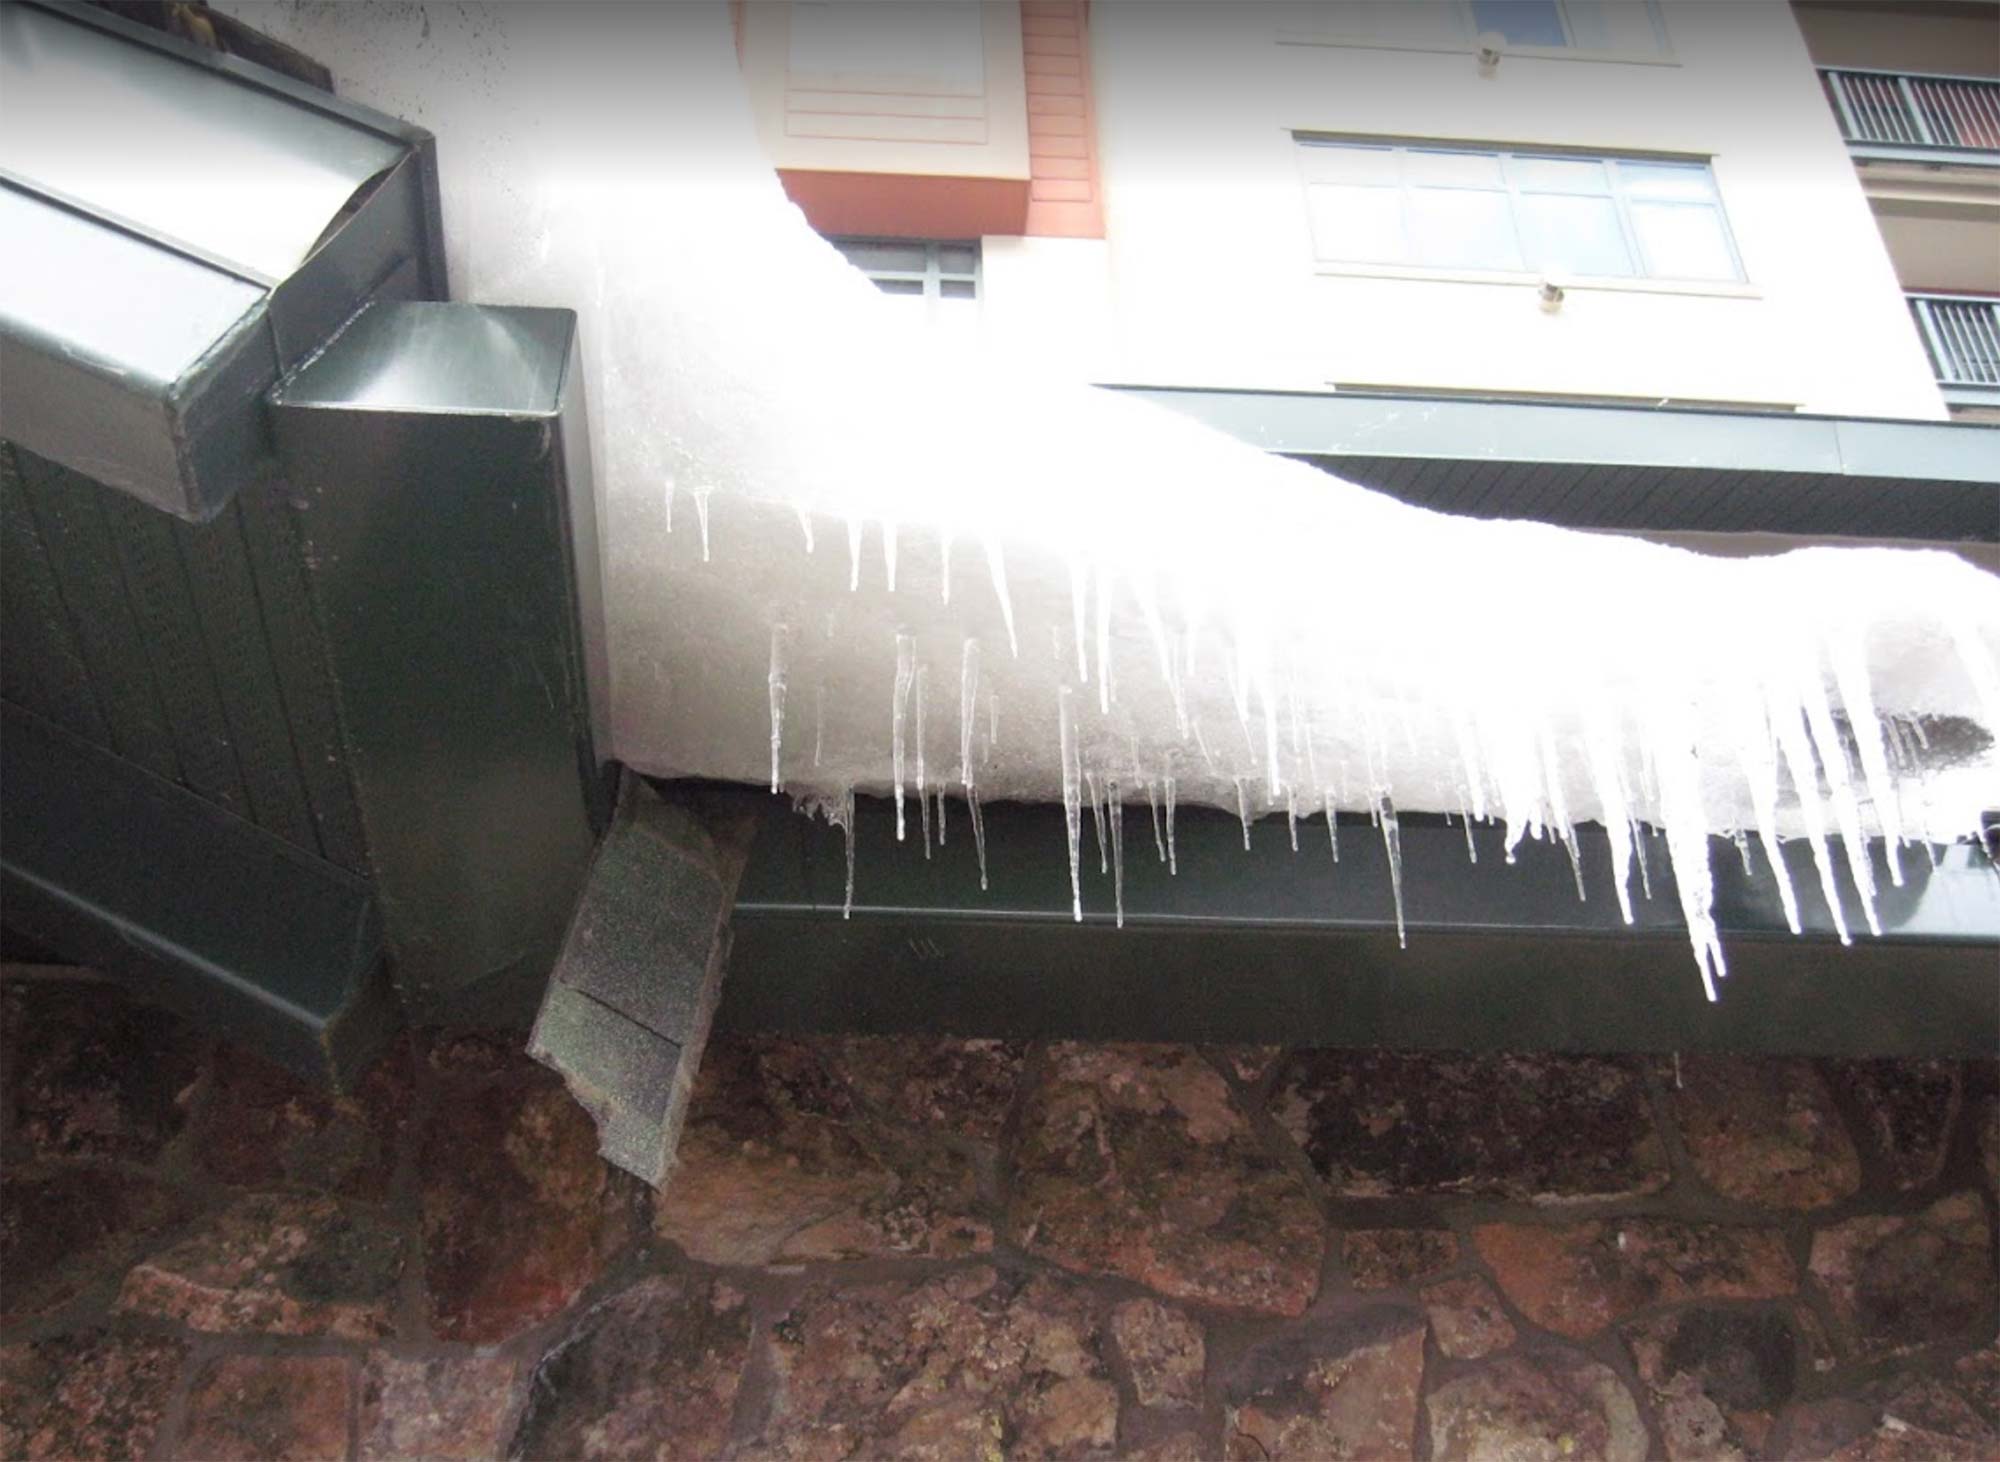 Ice Dams cause heavier loads on roofs